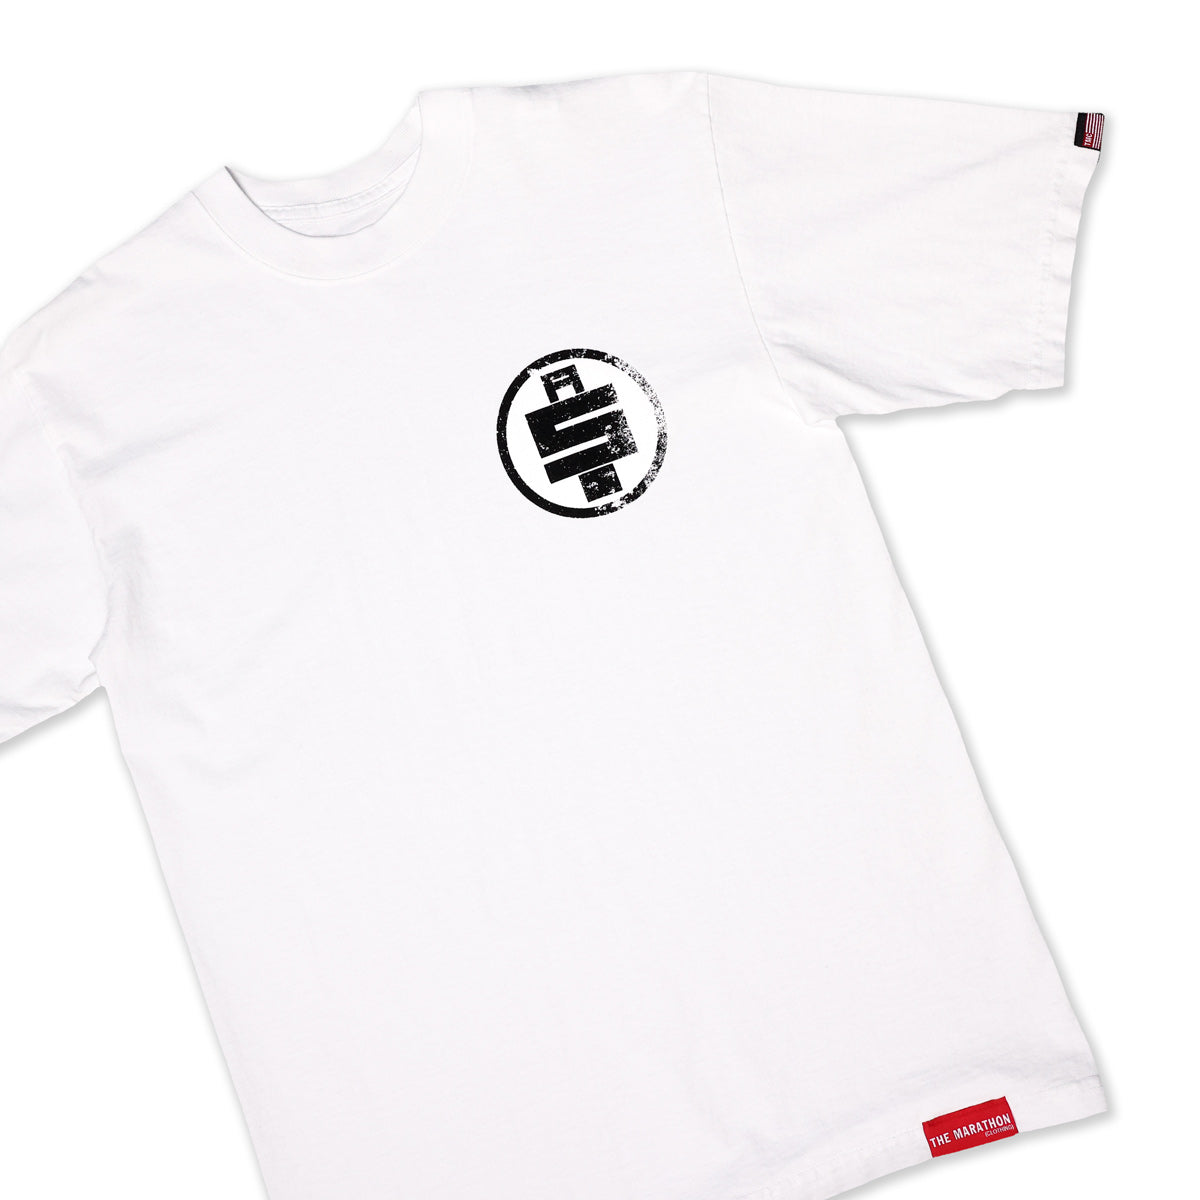 All Money In Vintage T-Shirt - White/Black - Front Detail